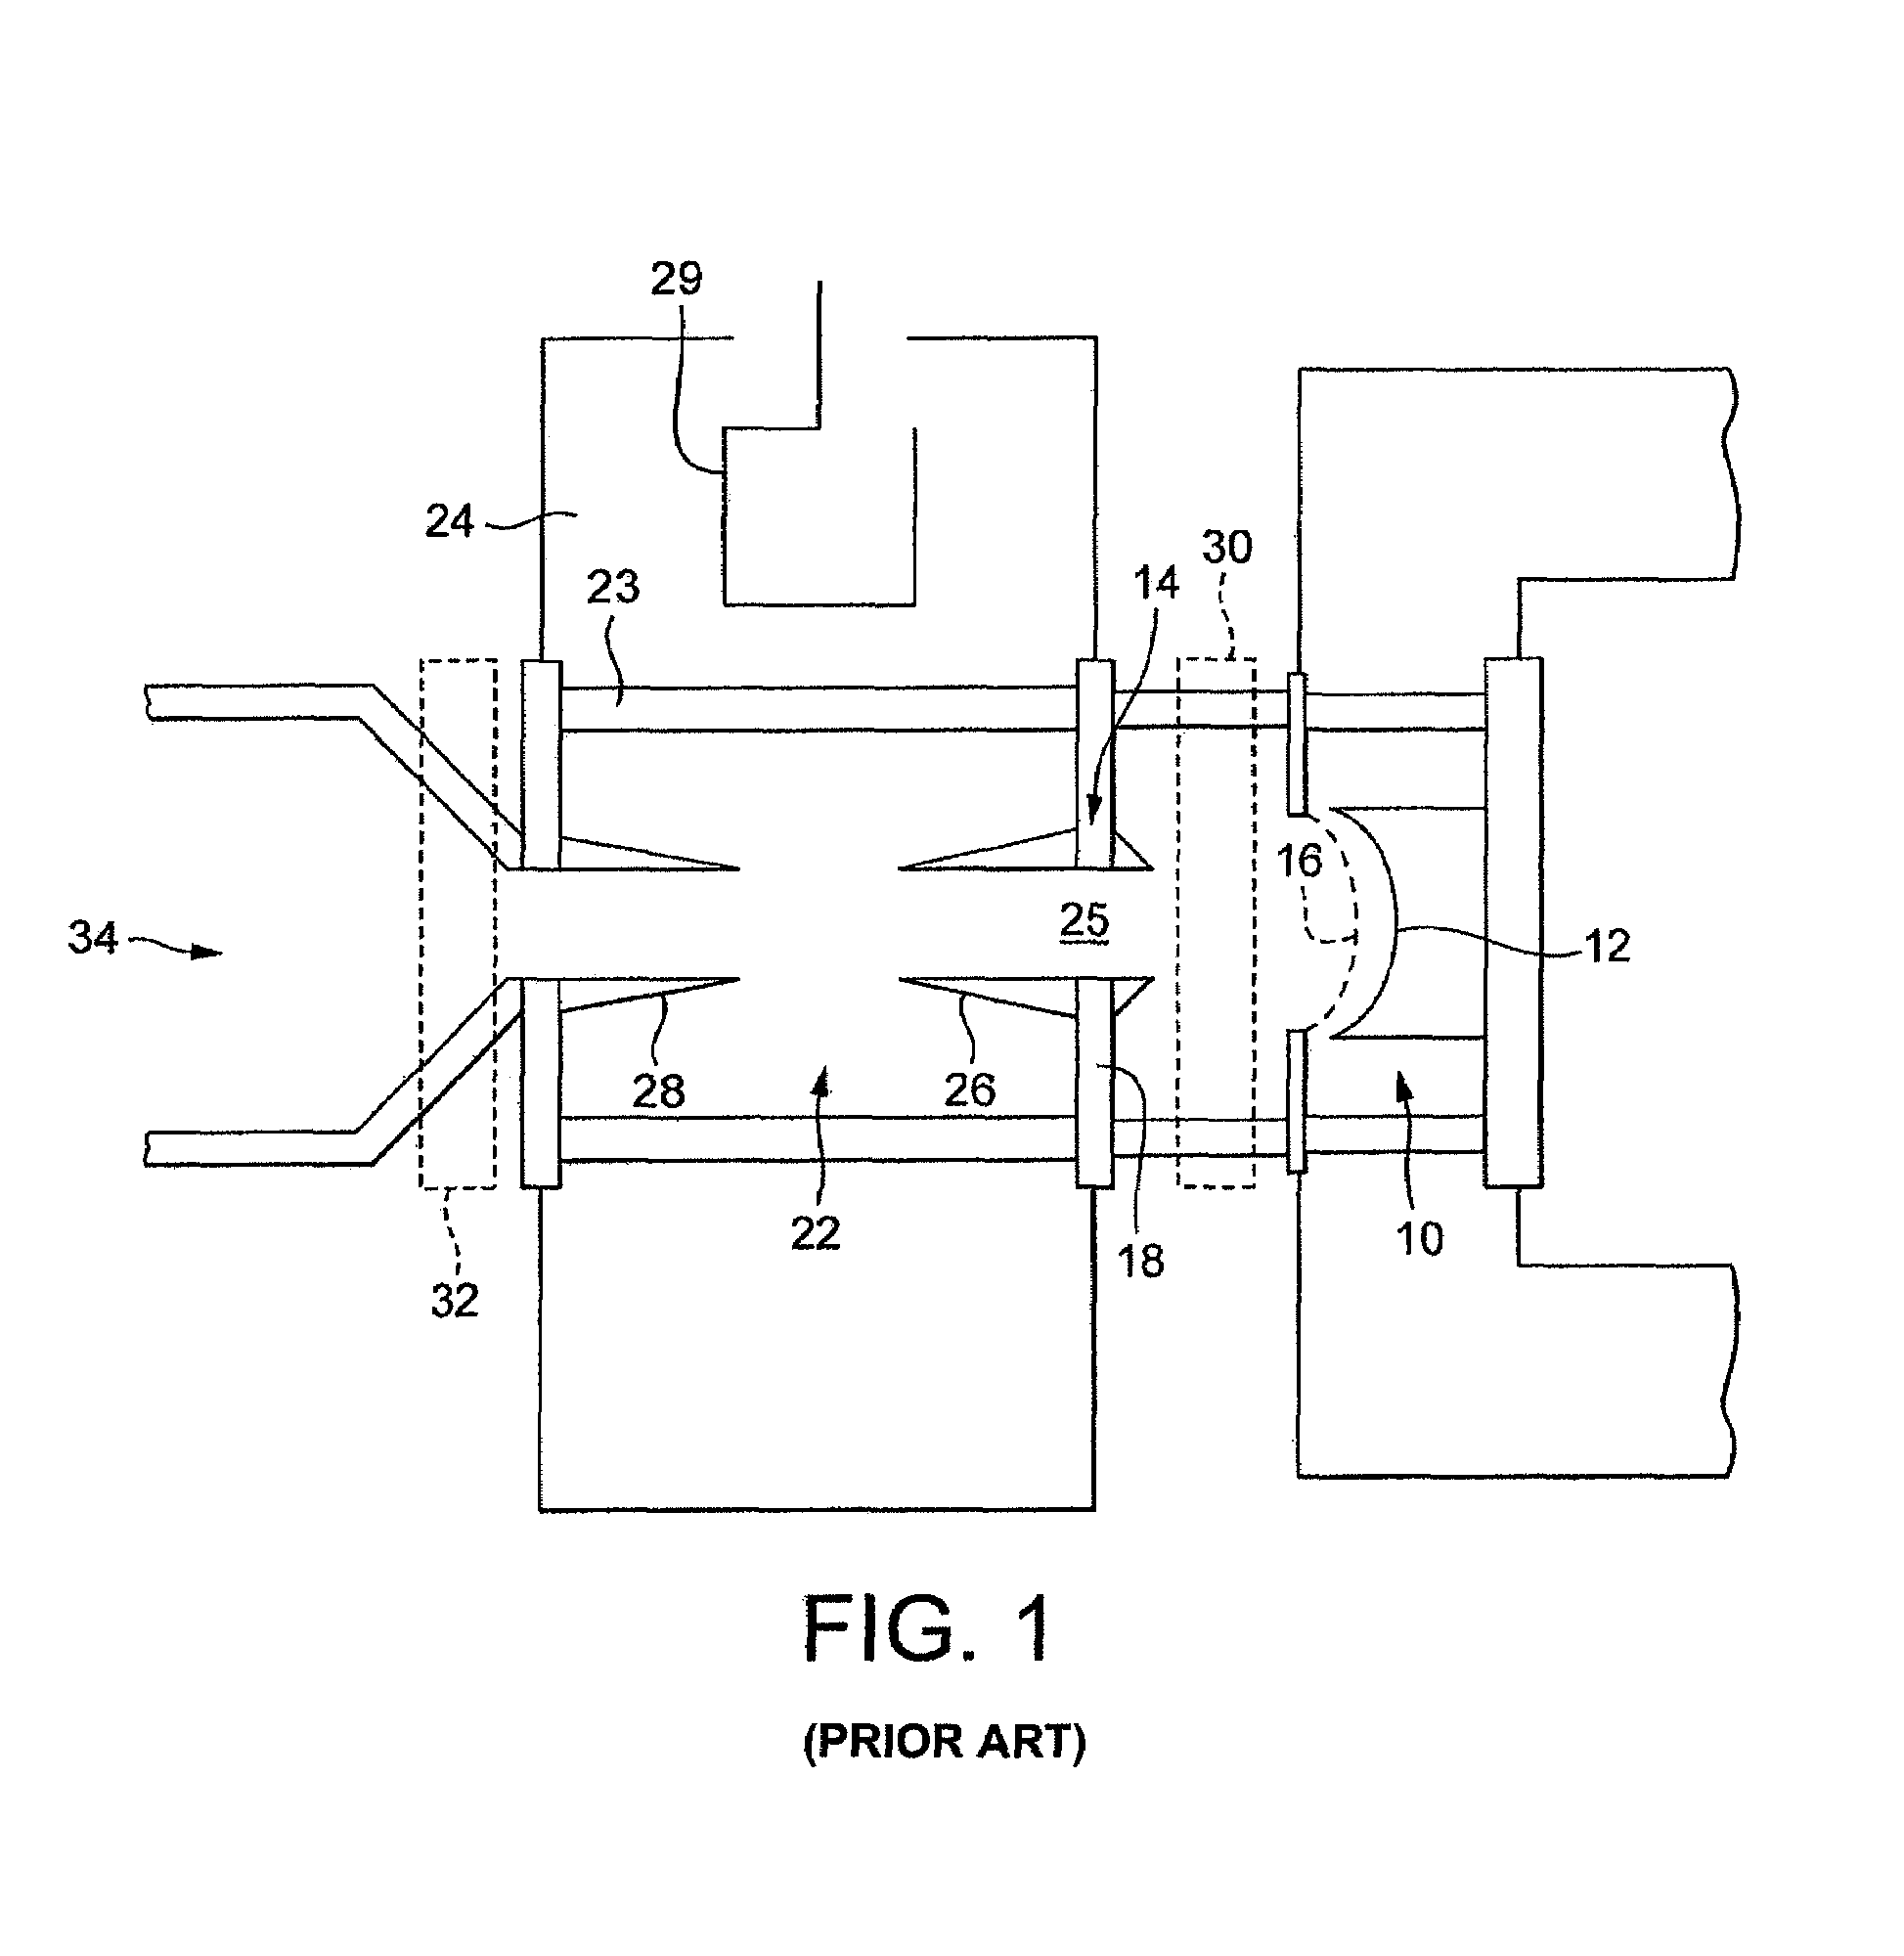 Pivotable magnetic assembly for allowing insertion or removal of a linear beam tube